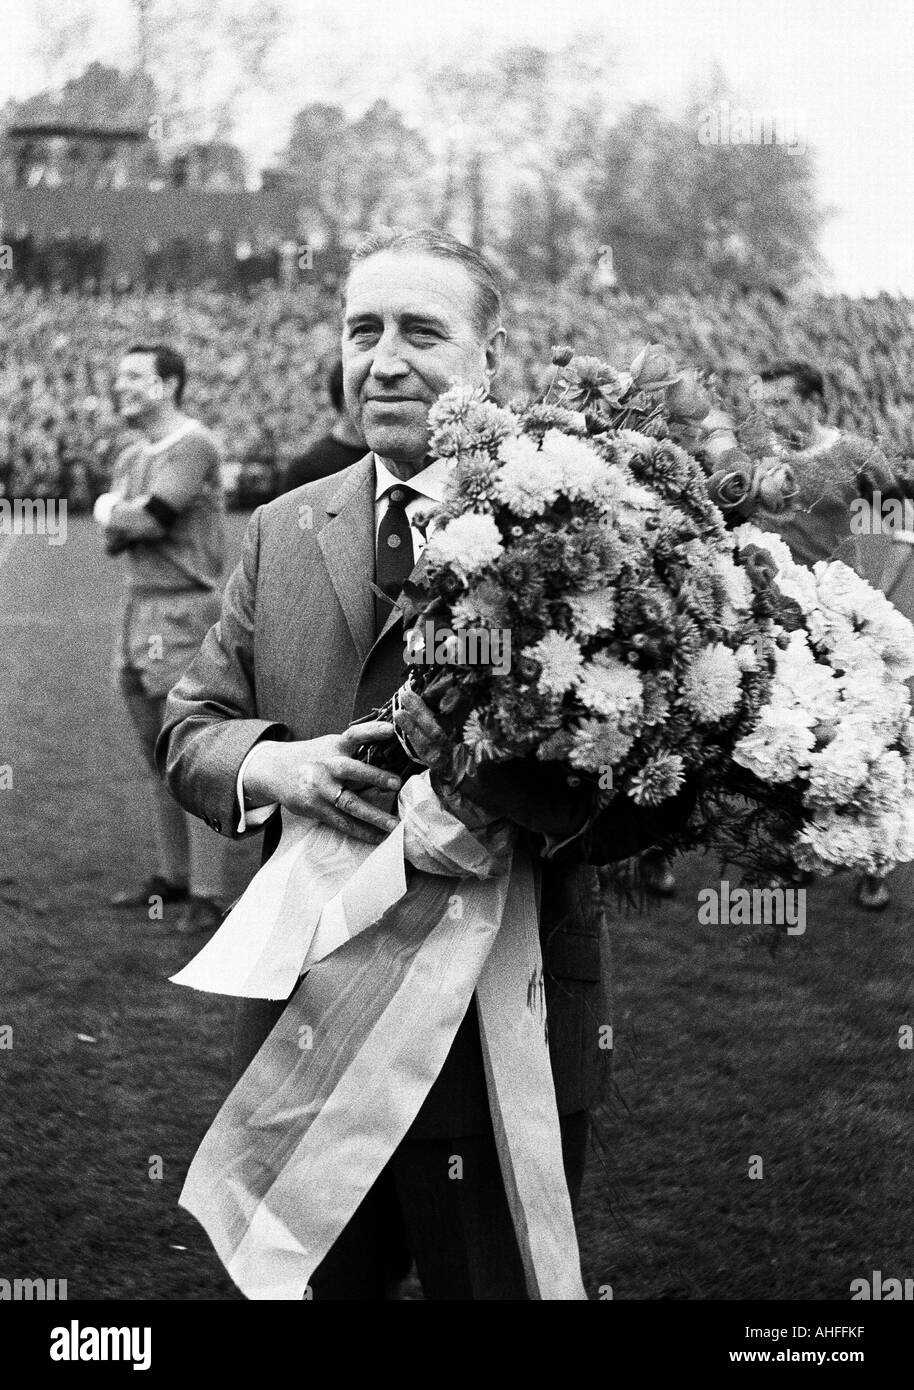 Honouring of Ernst Kuzorra who became 60 years old on 16 October 1965, Kuzorra was a famous football player of FC Schalke 04 in the twenties, thirties and forties Stock Photo